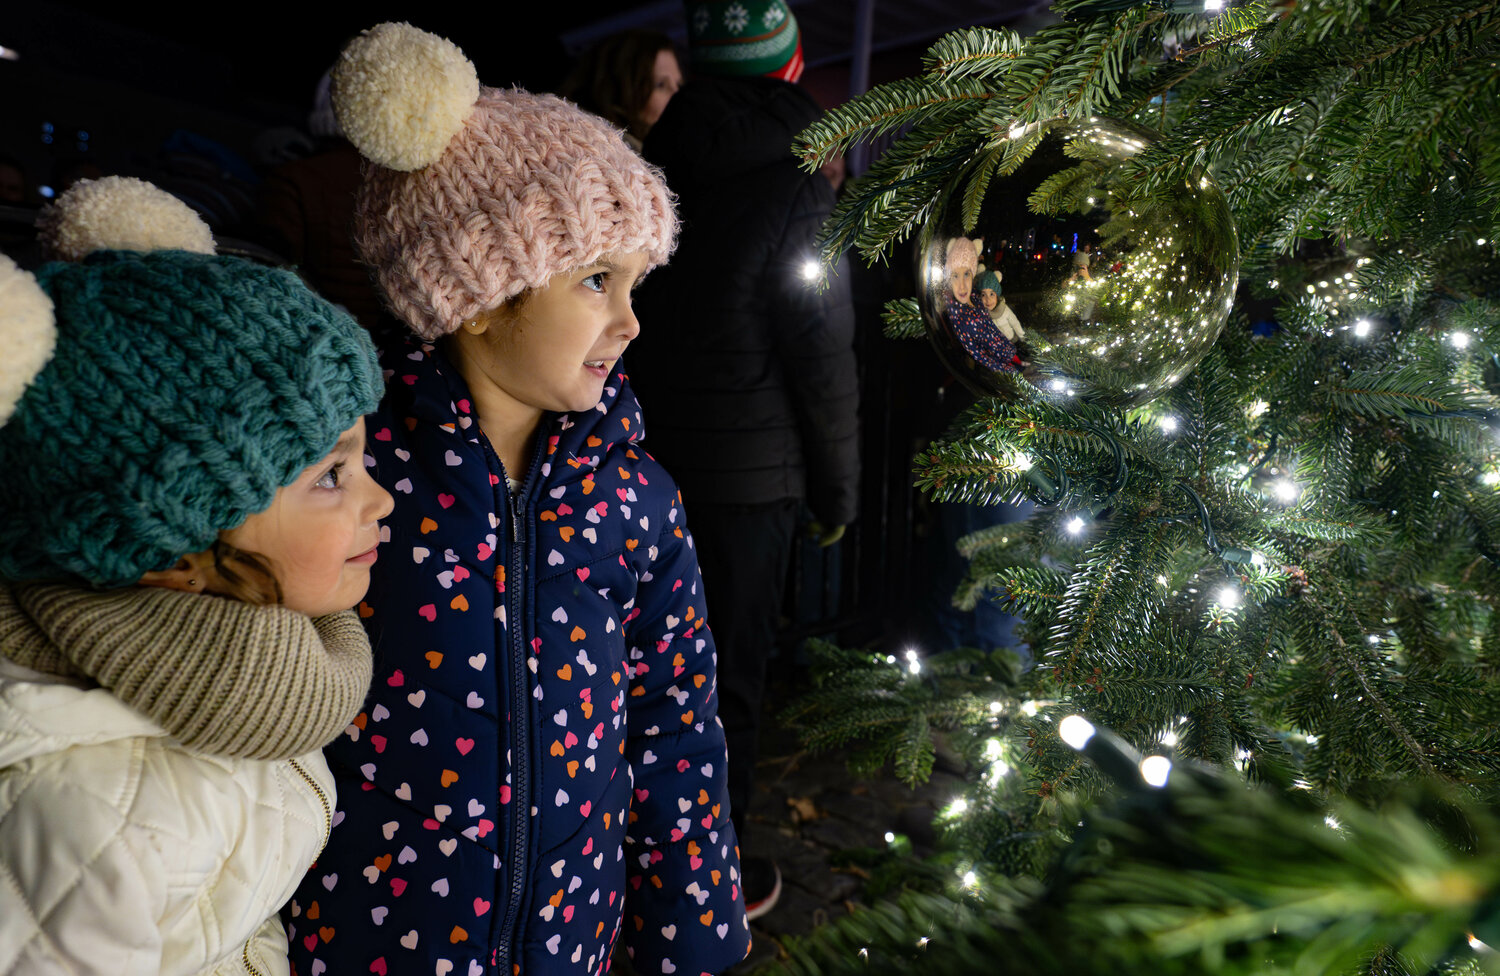 Amelia Millstein, left, and Florence Millstein marvel at their reflection in a Christmas ornament hanging from the newly lit Christmas Tree at the Doylestown Borough Christmas Tree Lighting event Friday night.